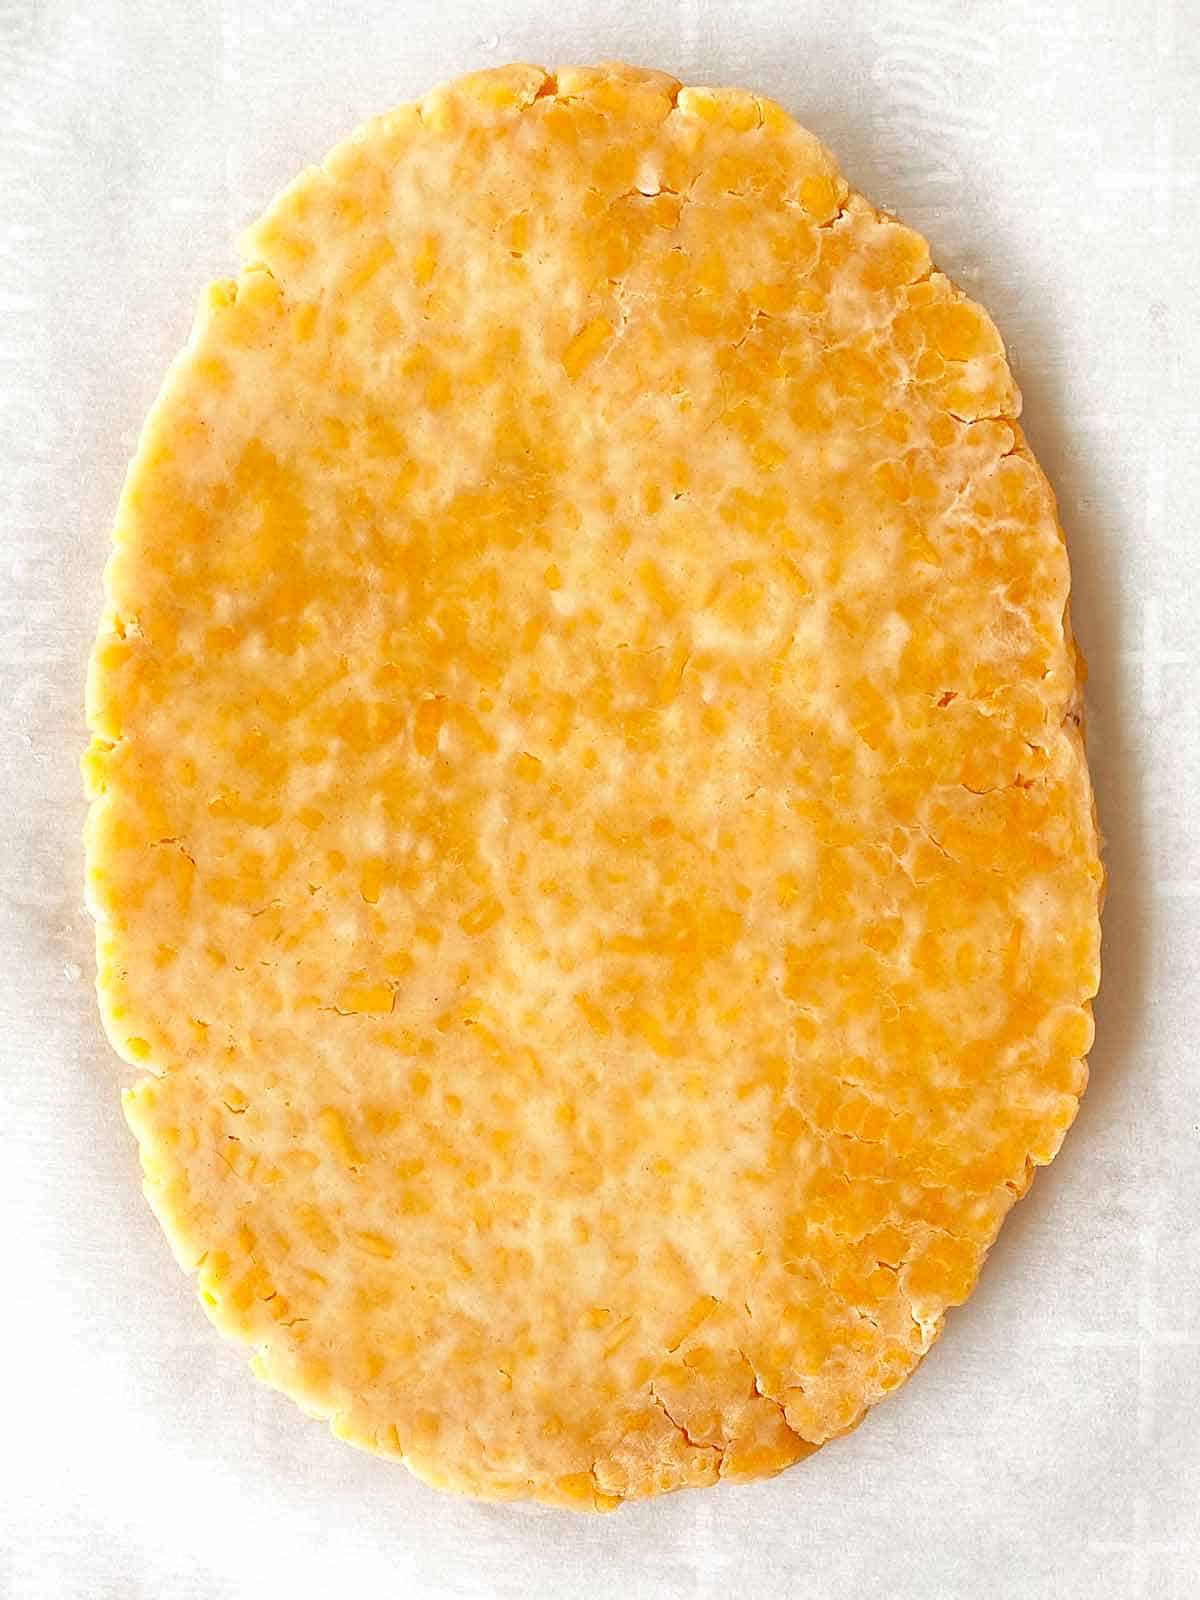 An oval of partially rolled cheez cracker dough on parchment paper.